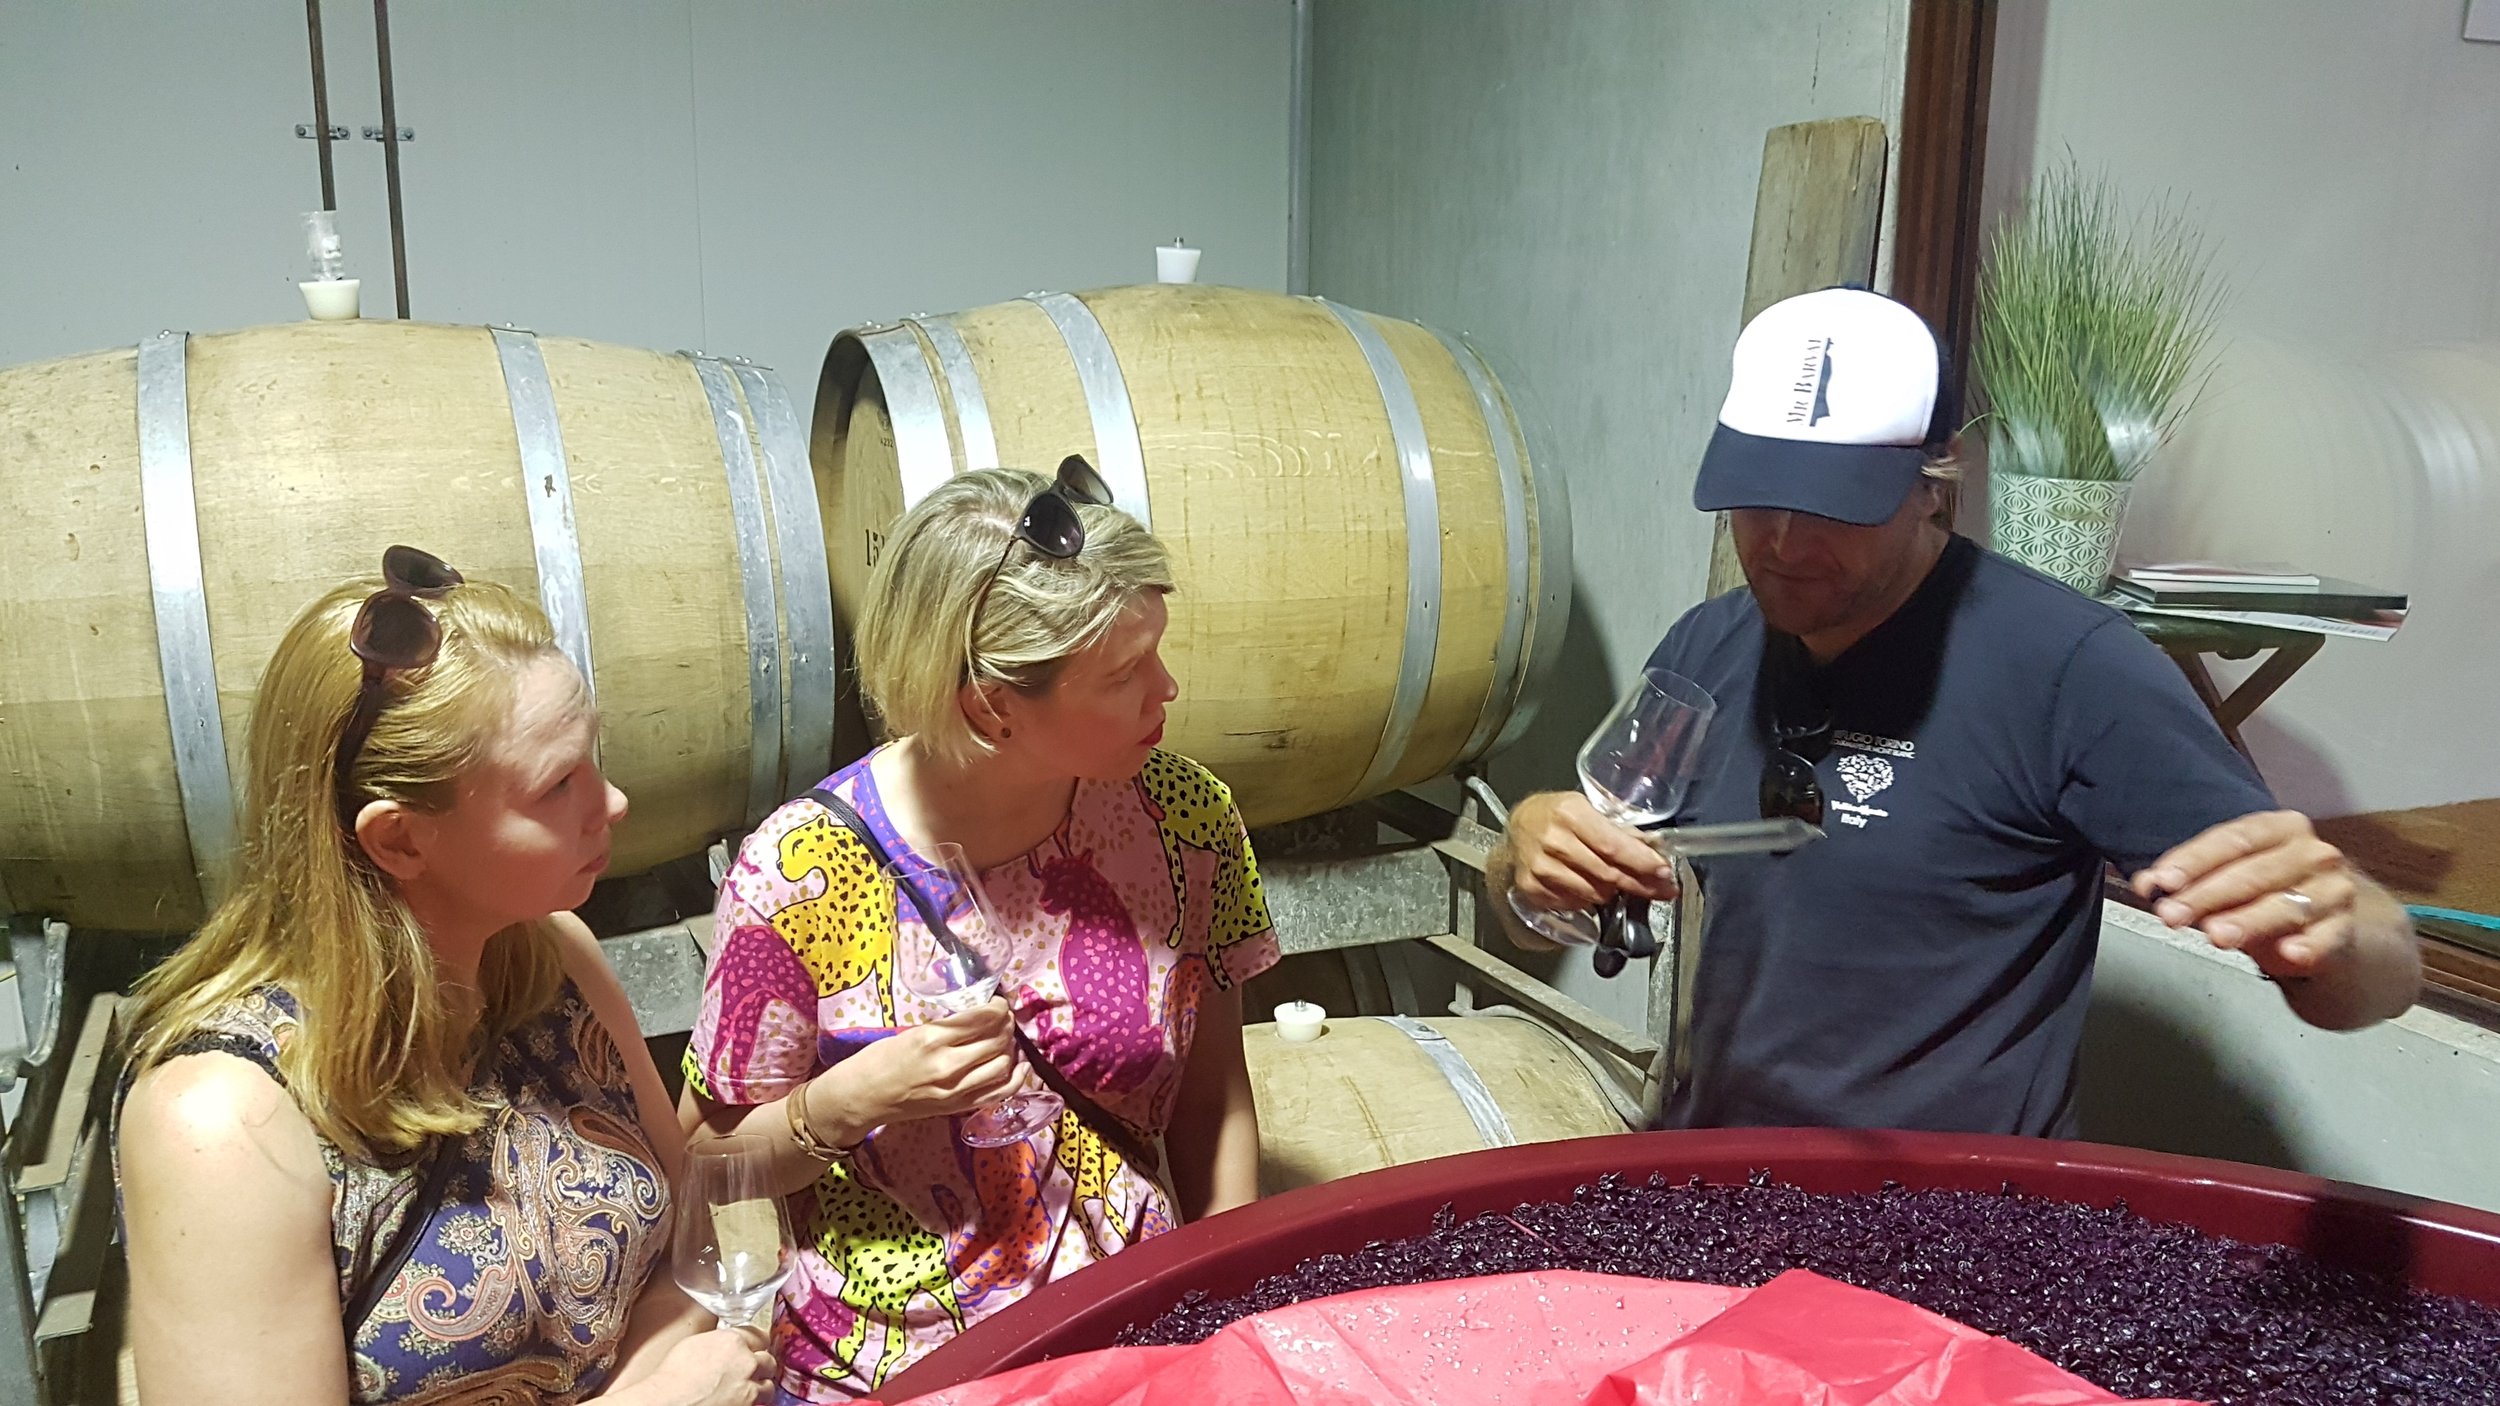 At Mr BARVAL we have an opportunity to meet the owner and winemaker at one of the regions genuine artisan wine producers and to embrace the magic and the story that lives within each glass!